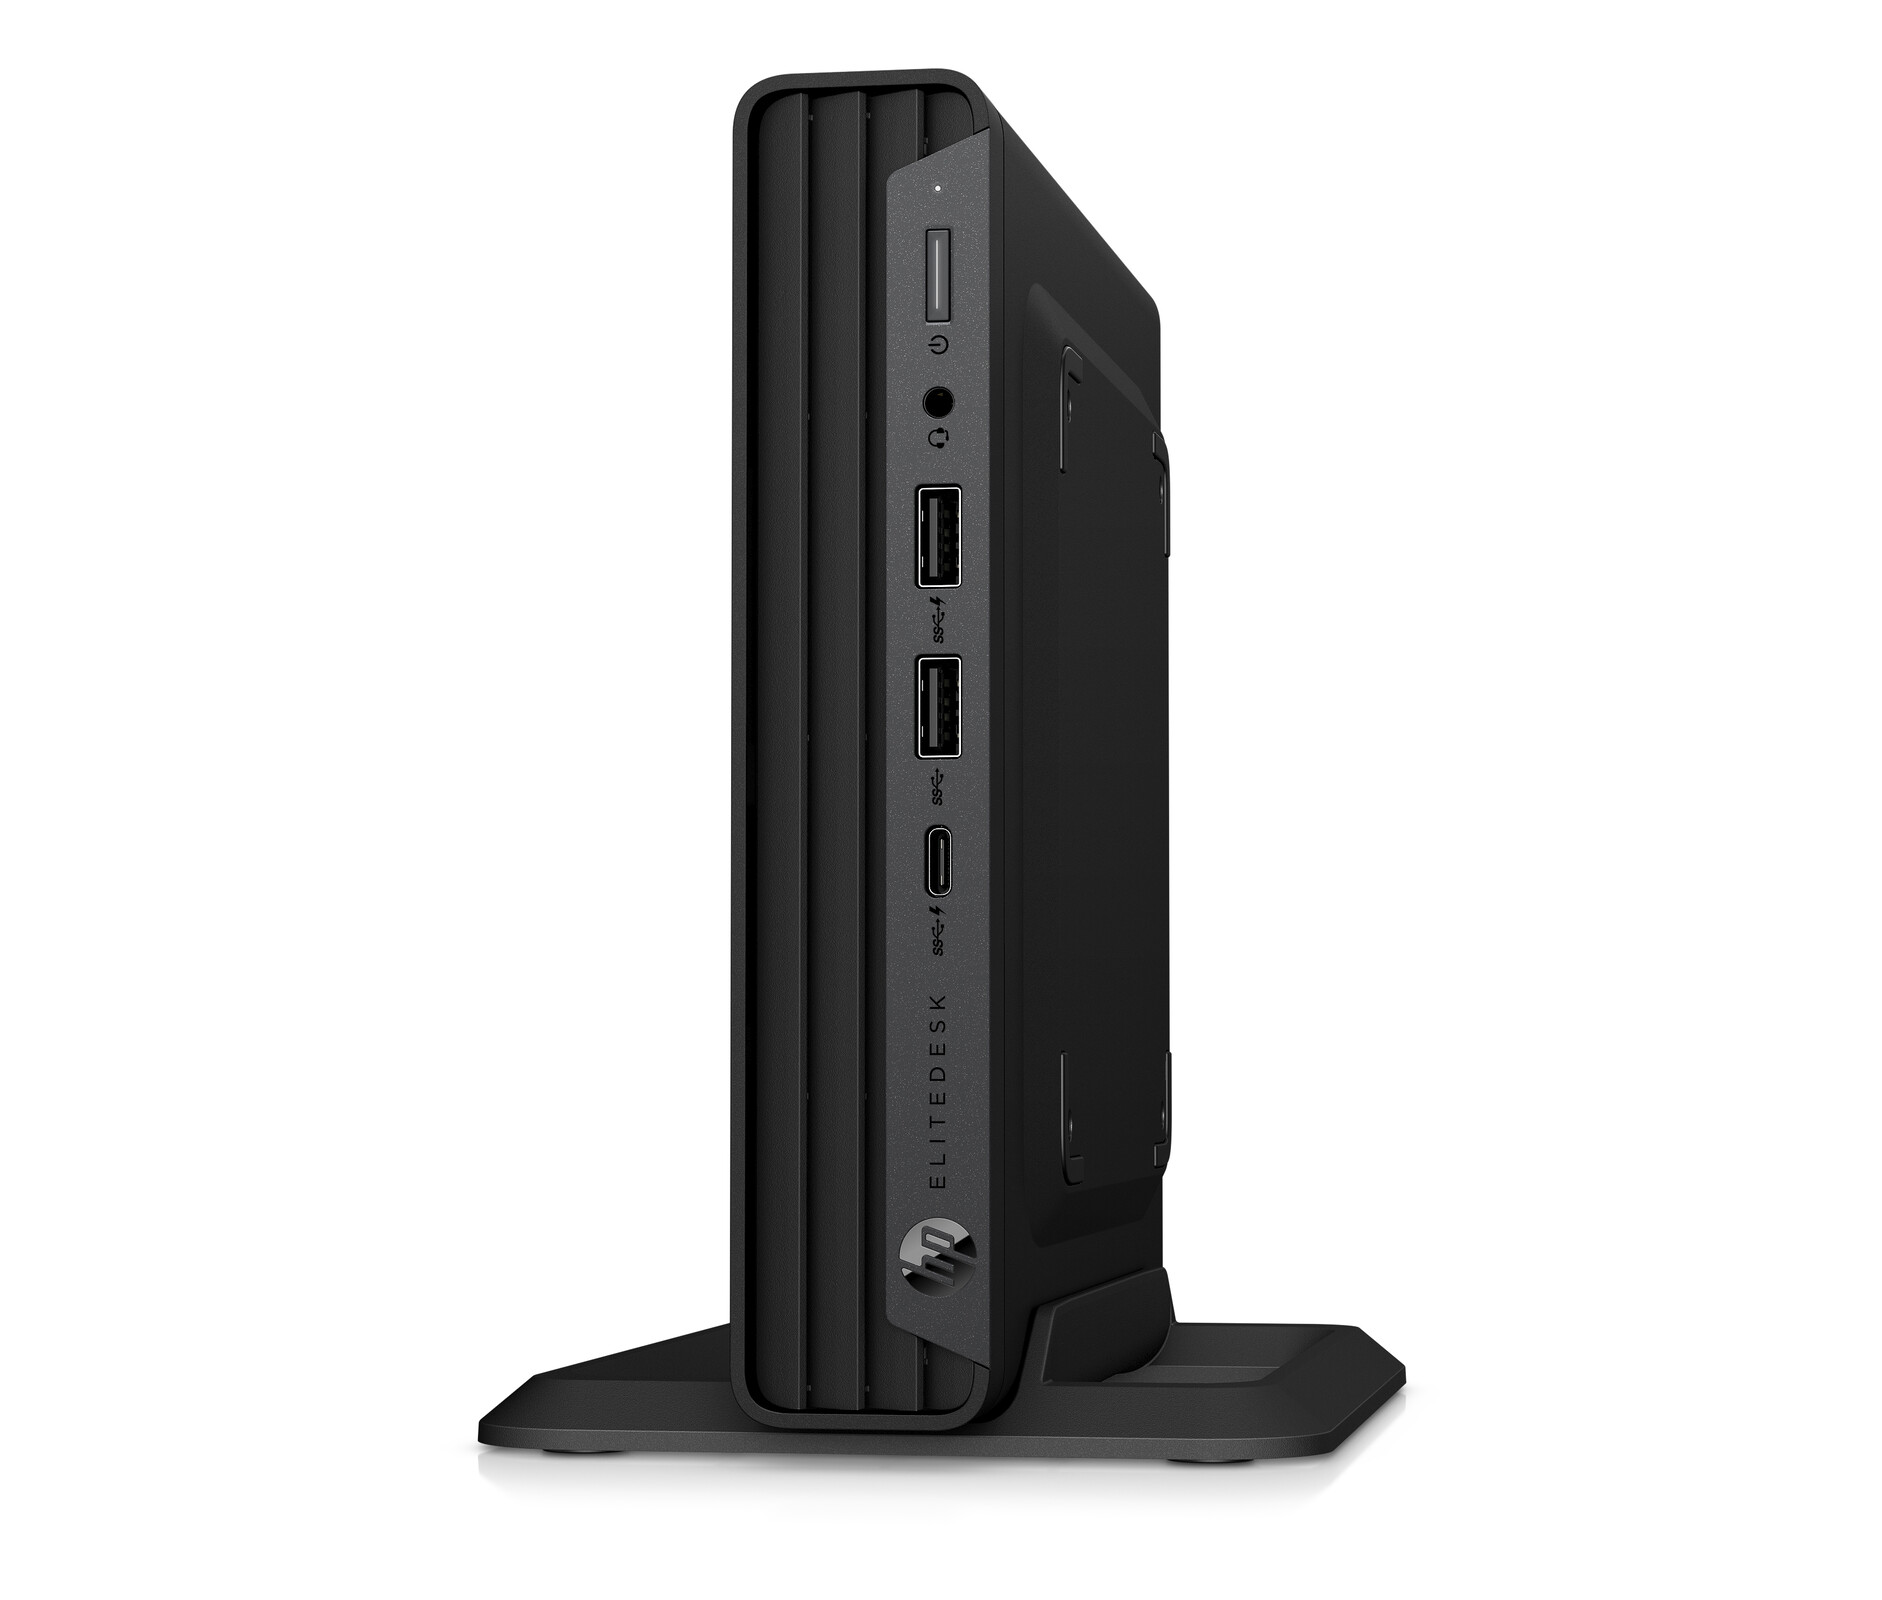 HP EliteDesk 800 G6 Mini PC, SFF, and Tower PC offerings pack increased